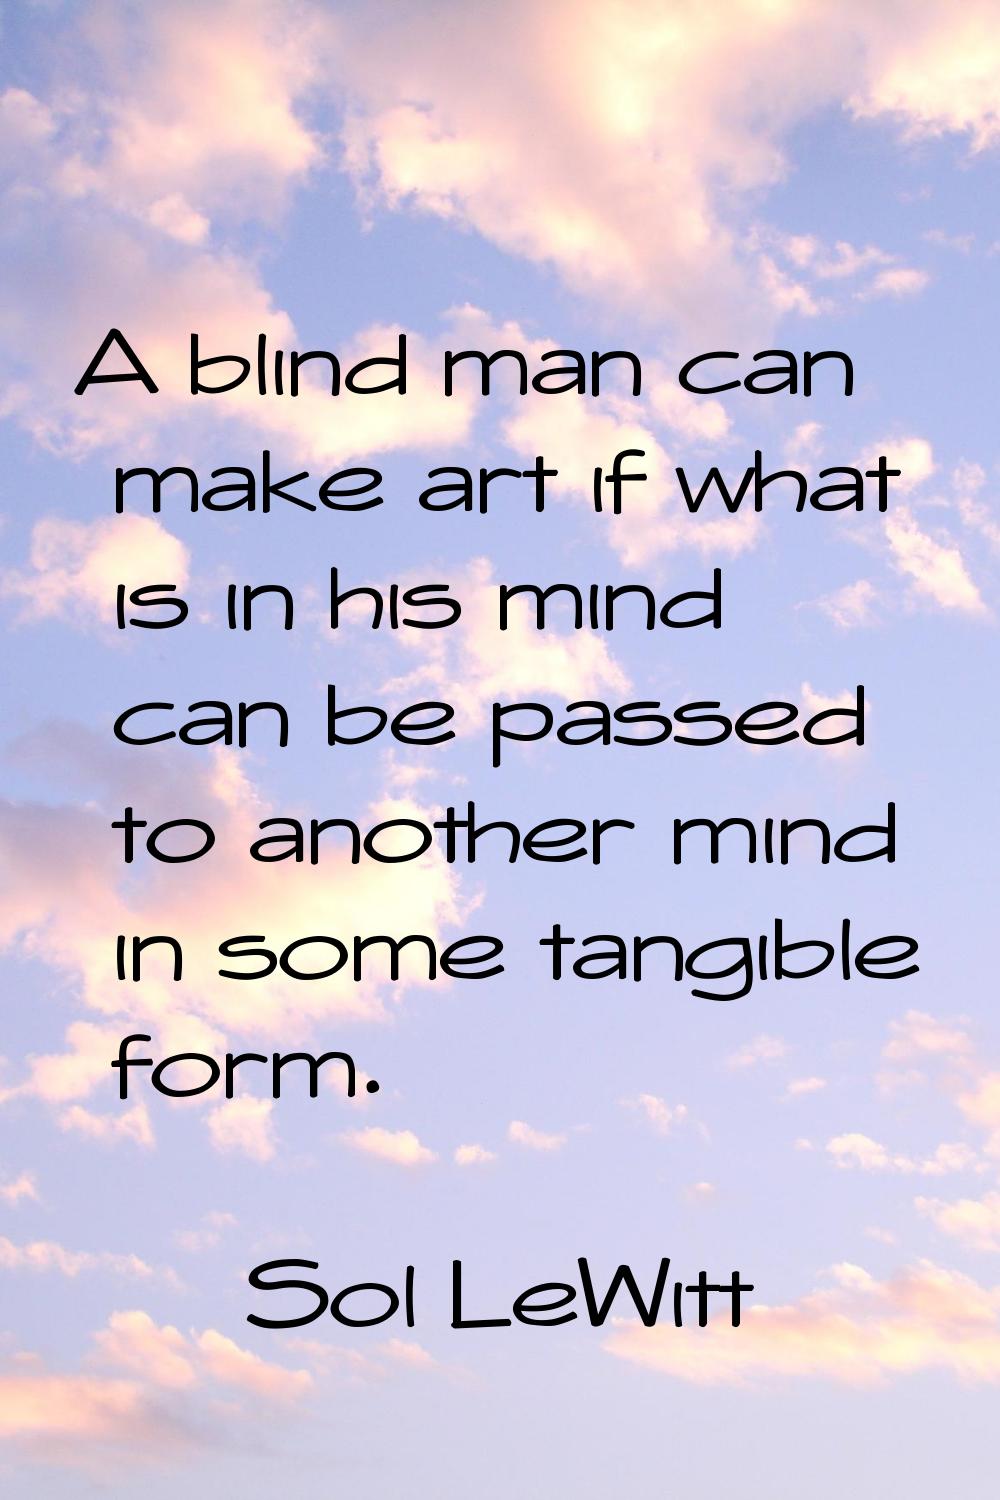 A blind man can make art if what is in his mind can be passed to another mind in some tangible form